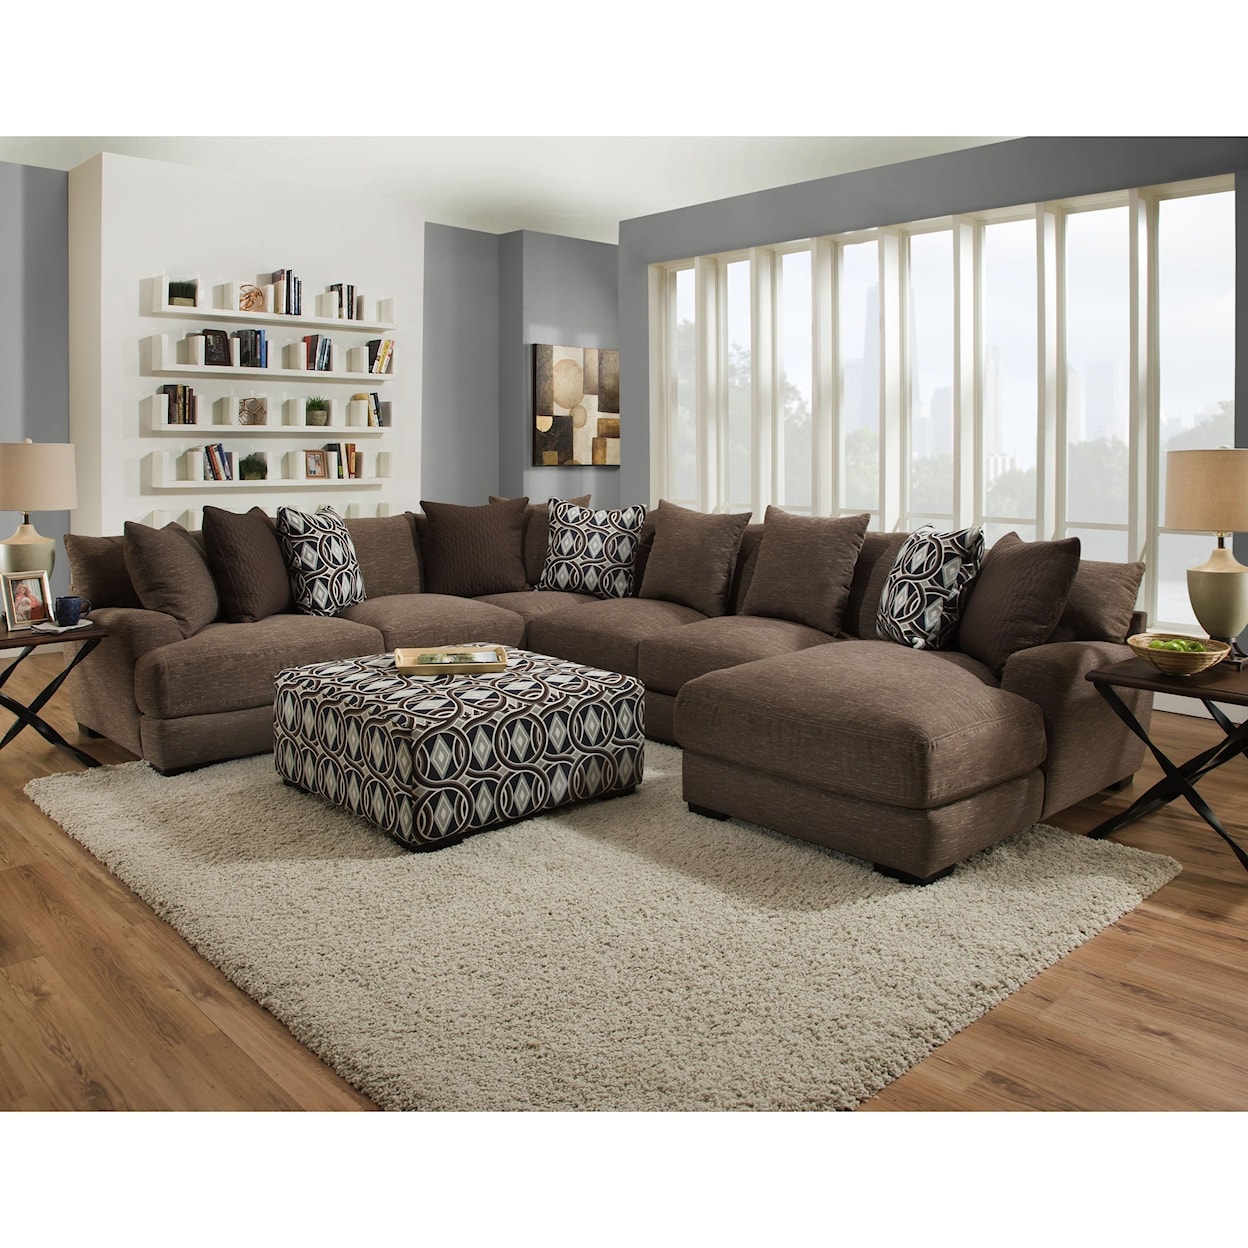 Franklin Oslo Sectional Sofa with 5 Seats and Chaise